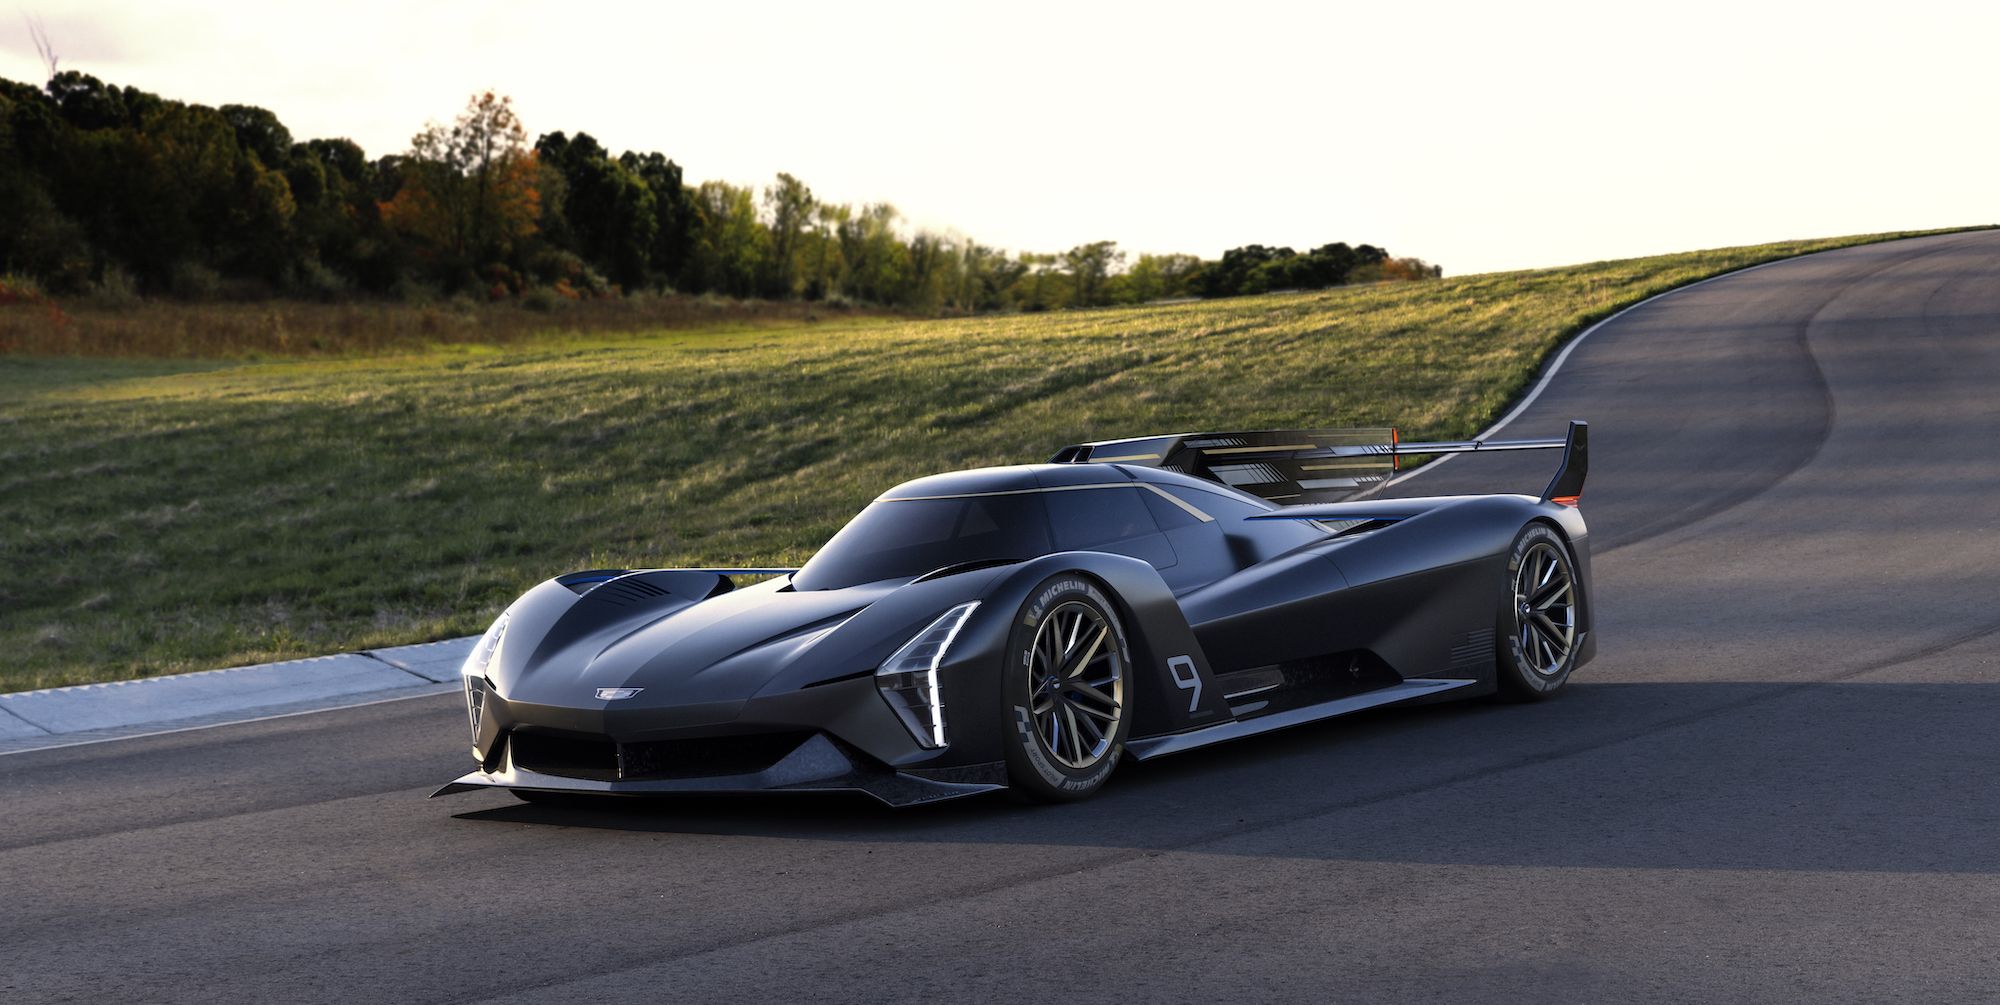 The Cadillac Project GTP Hypercar Is a Gorgeous Race Car With an All-New V-8